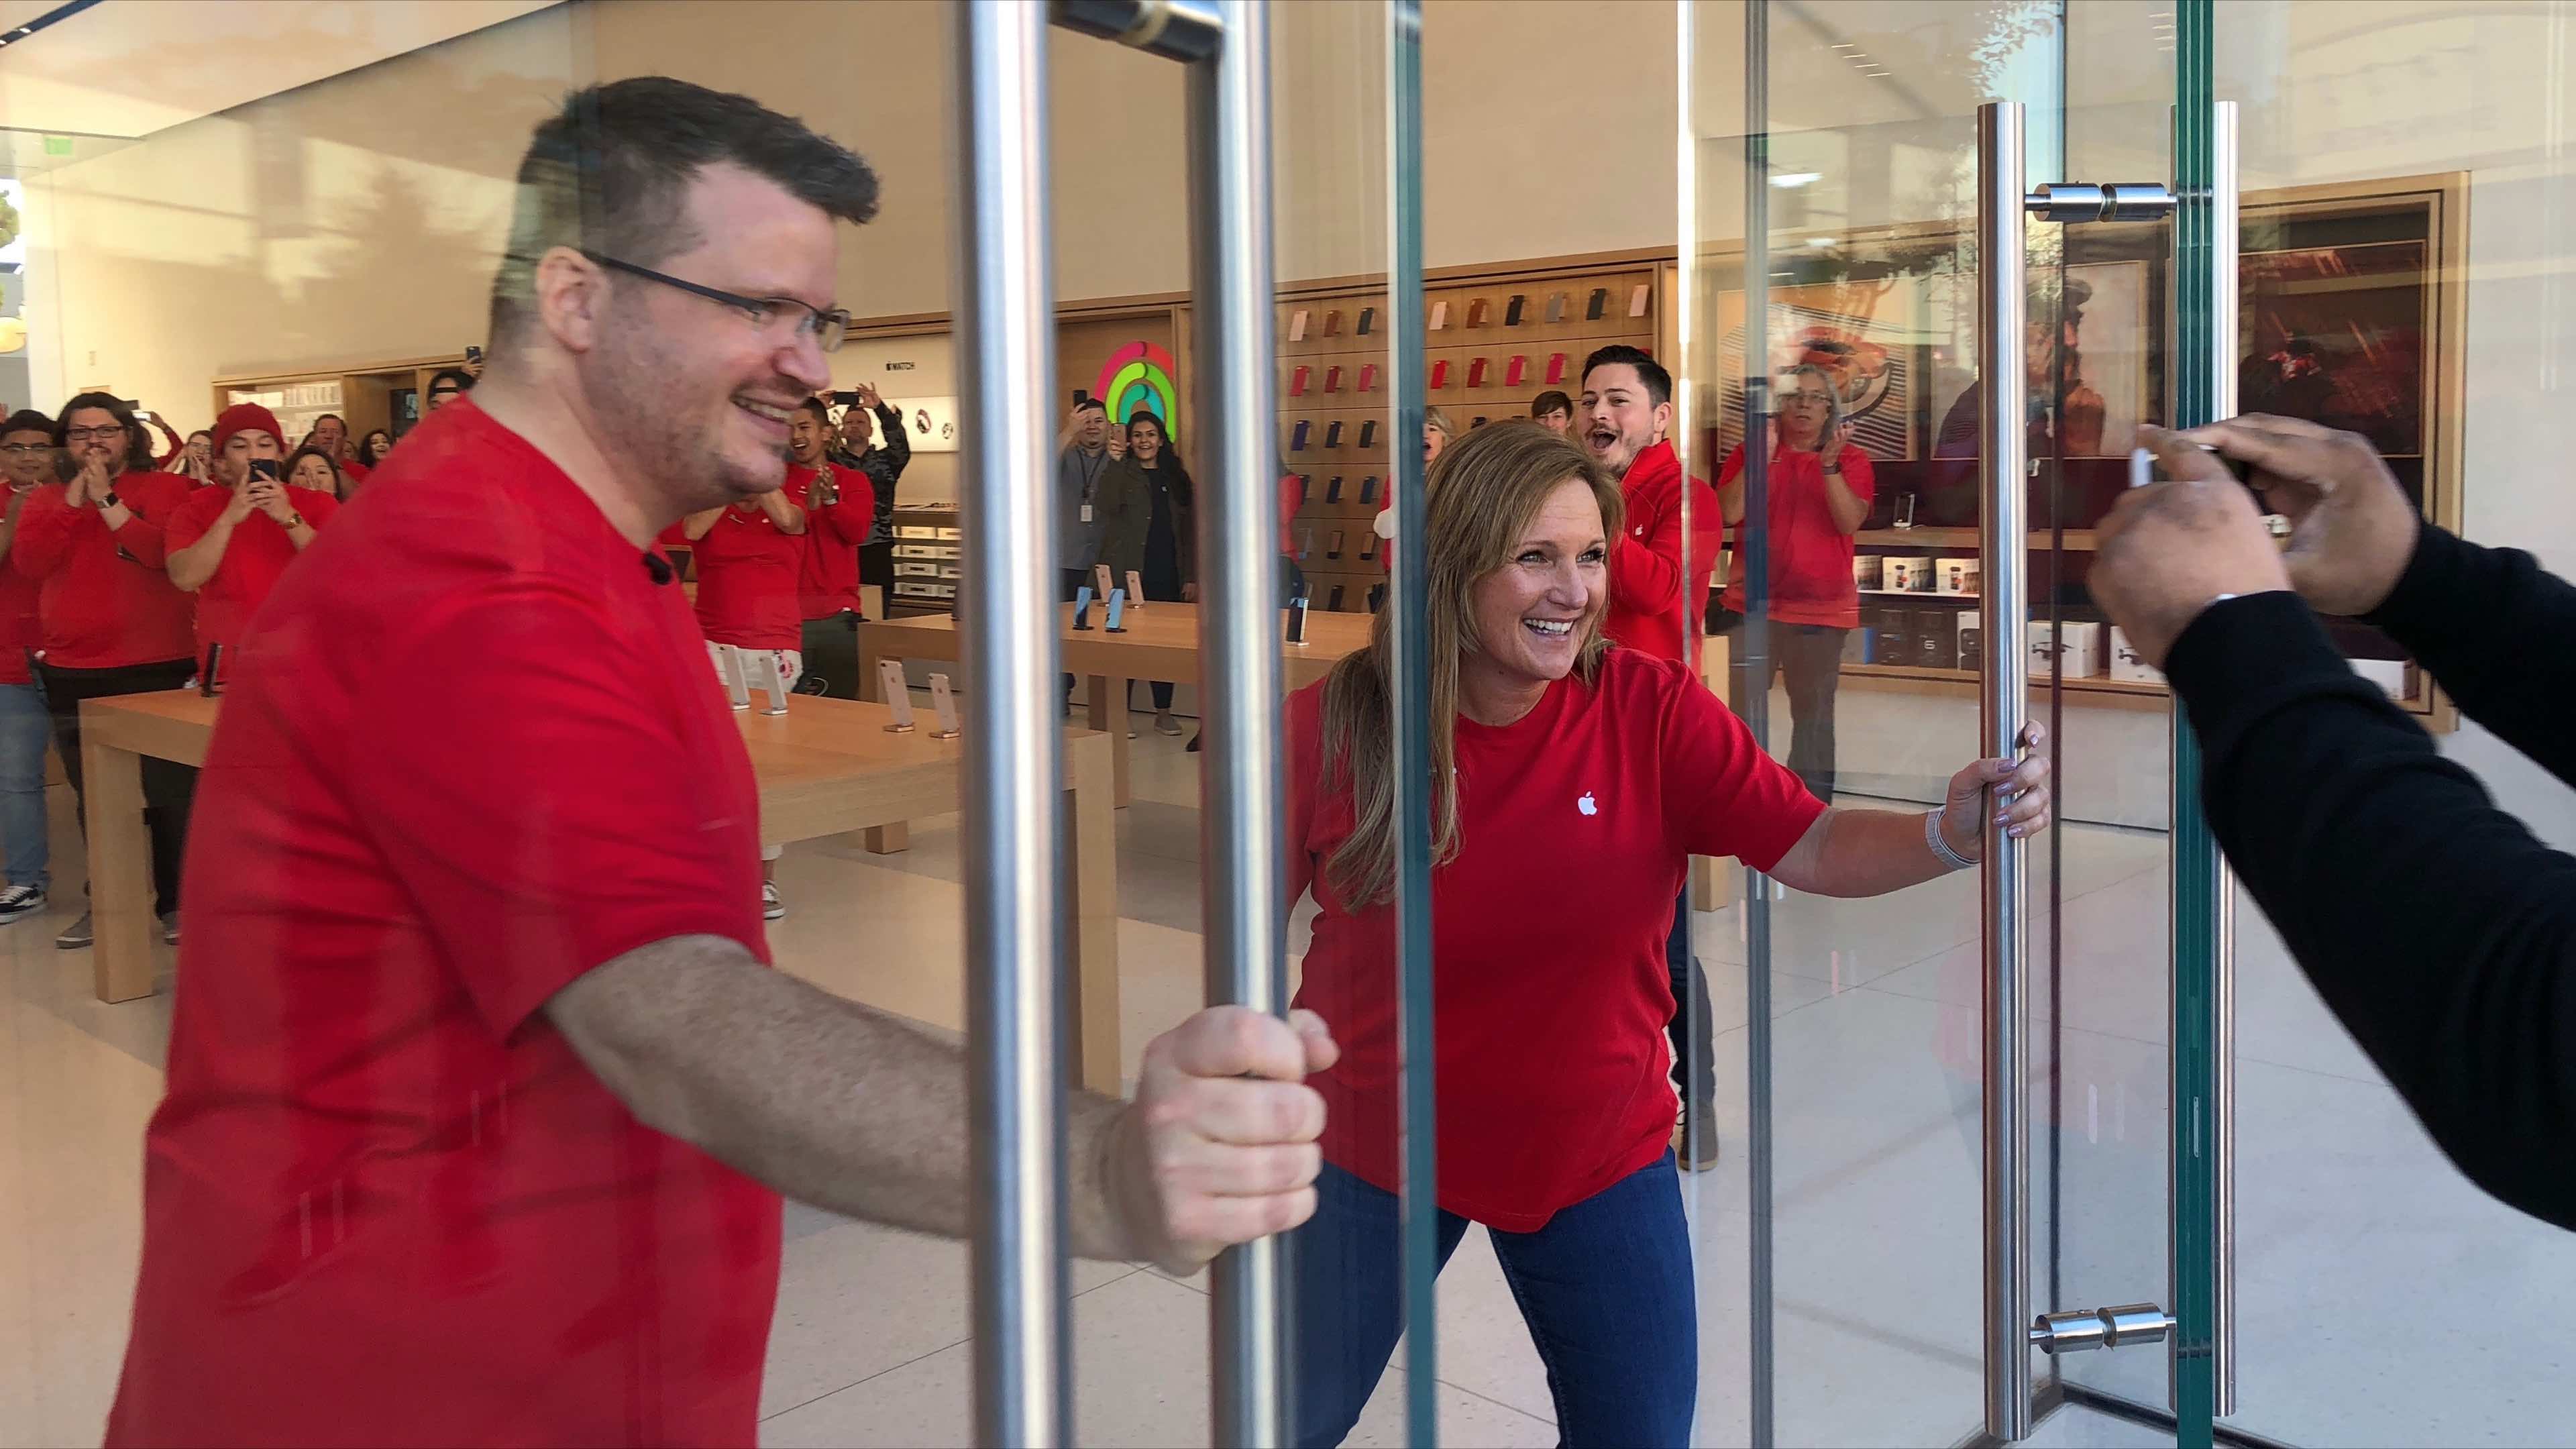 Apple Store - The Domain, Austin, Texas, So my co-worker…